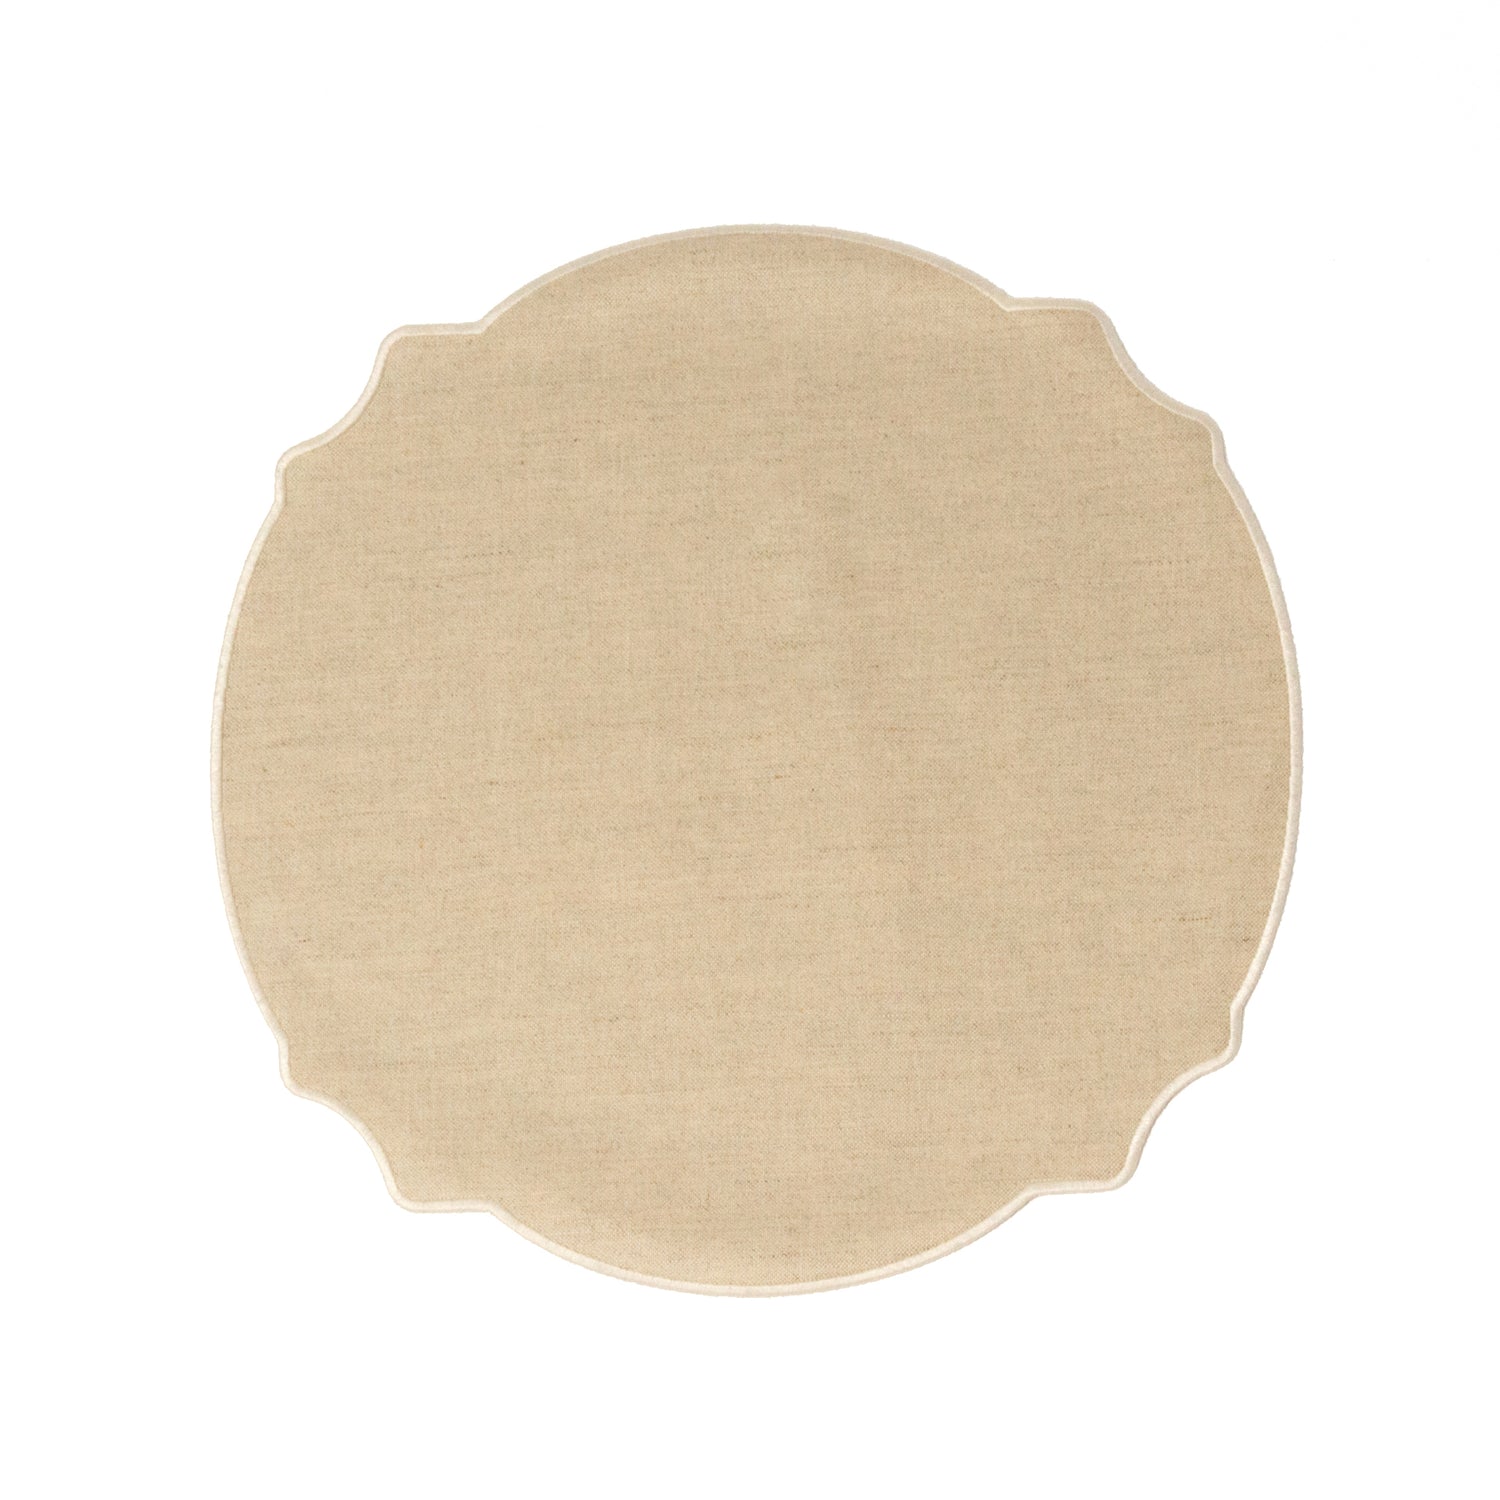 Round Placemat with Contour